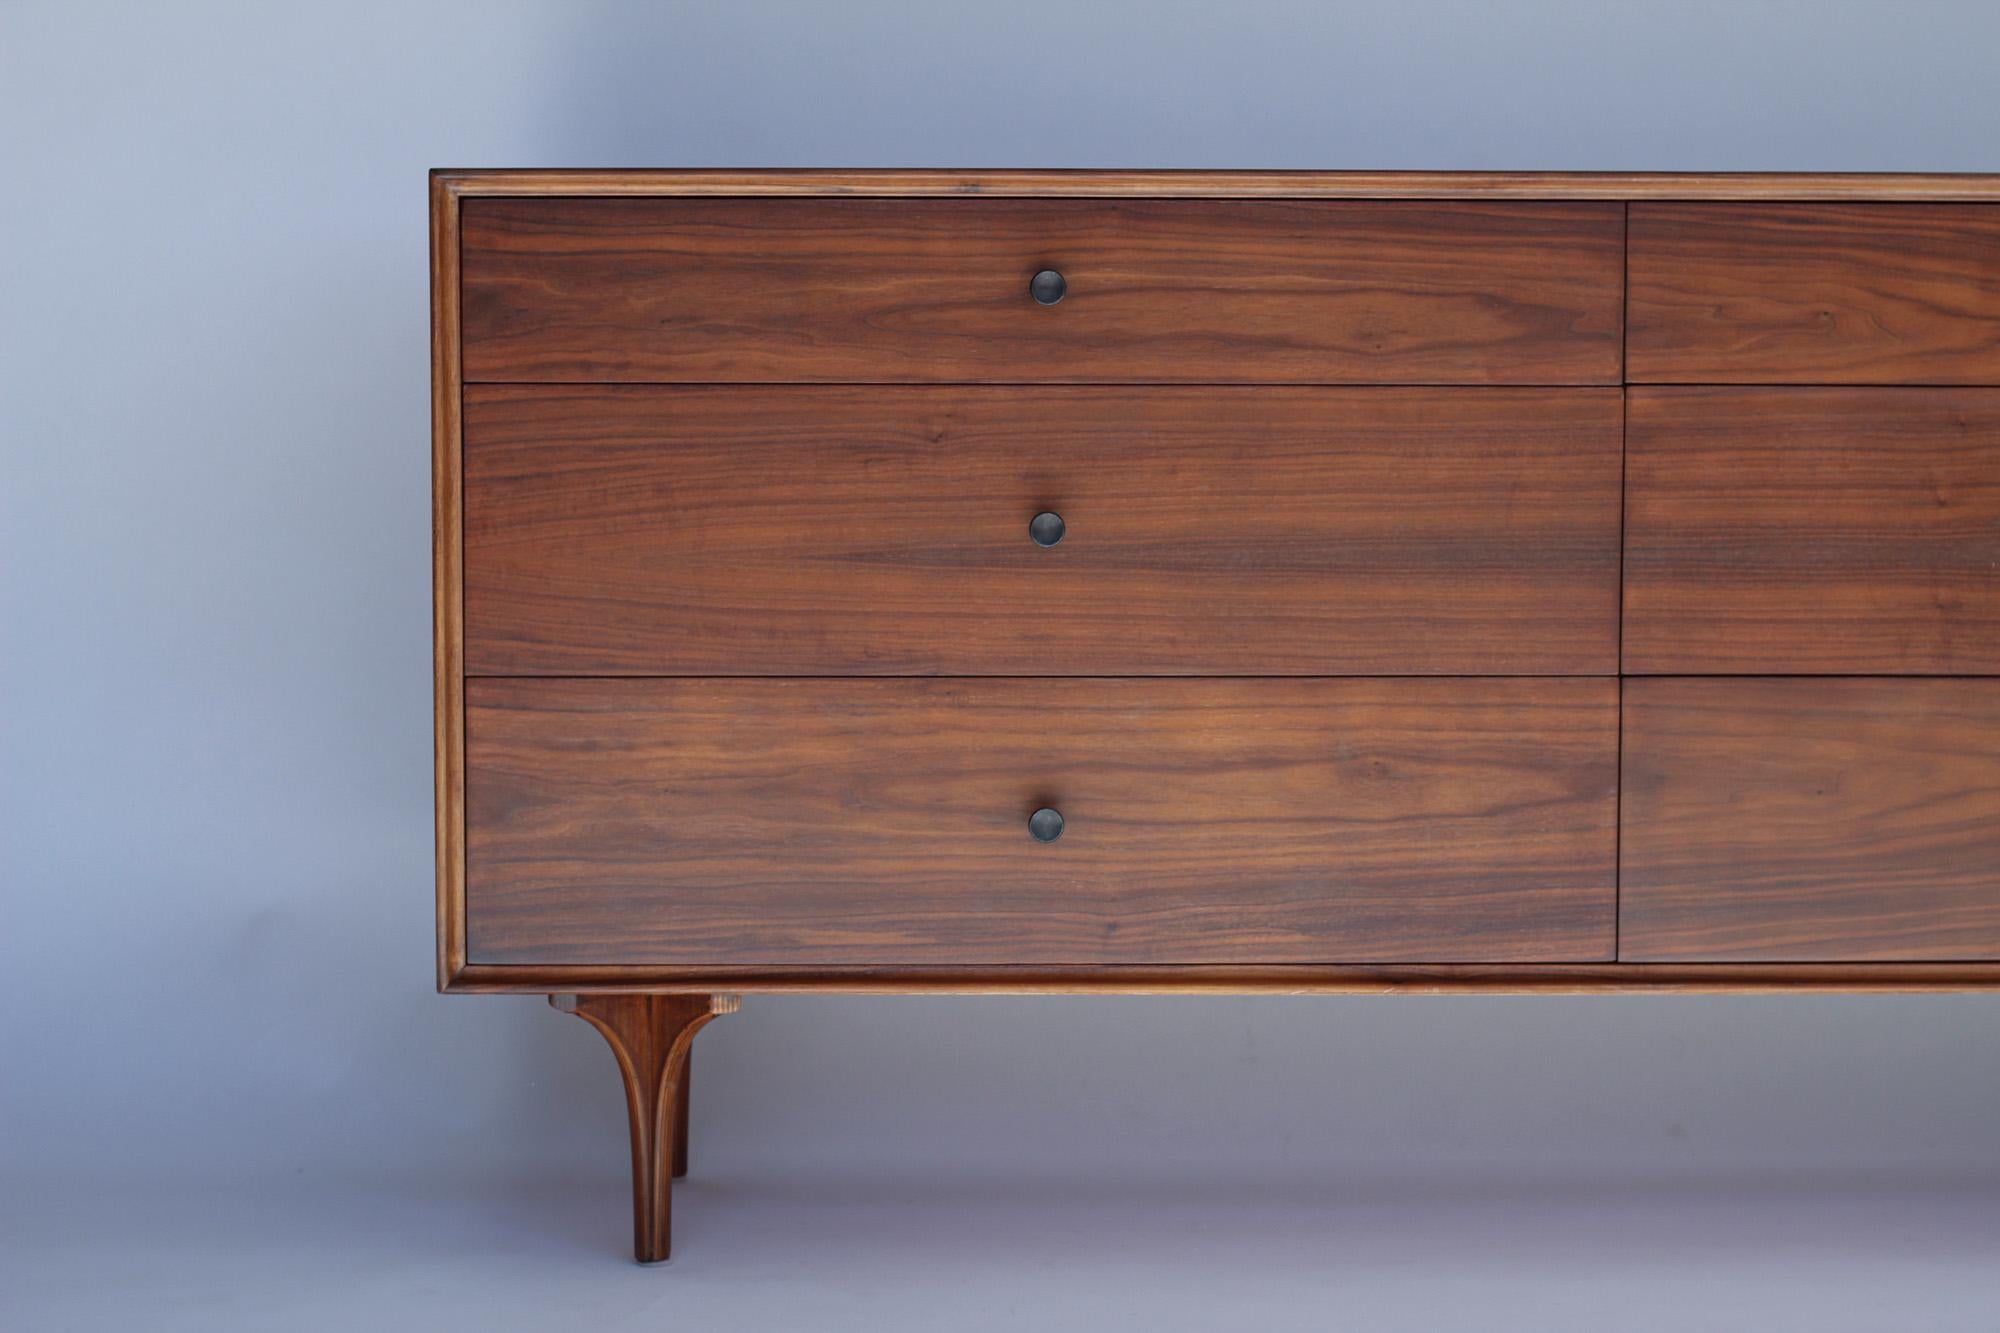 Walnut dresser routinely attributed to Robert Baron aka Craig Nealy for Glenn of California however this piece has original label by Greta Grossman. This dresser was acquired from original owner in Palm Springs along with another identical dresser